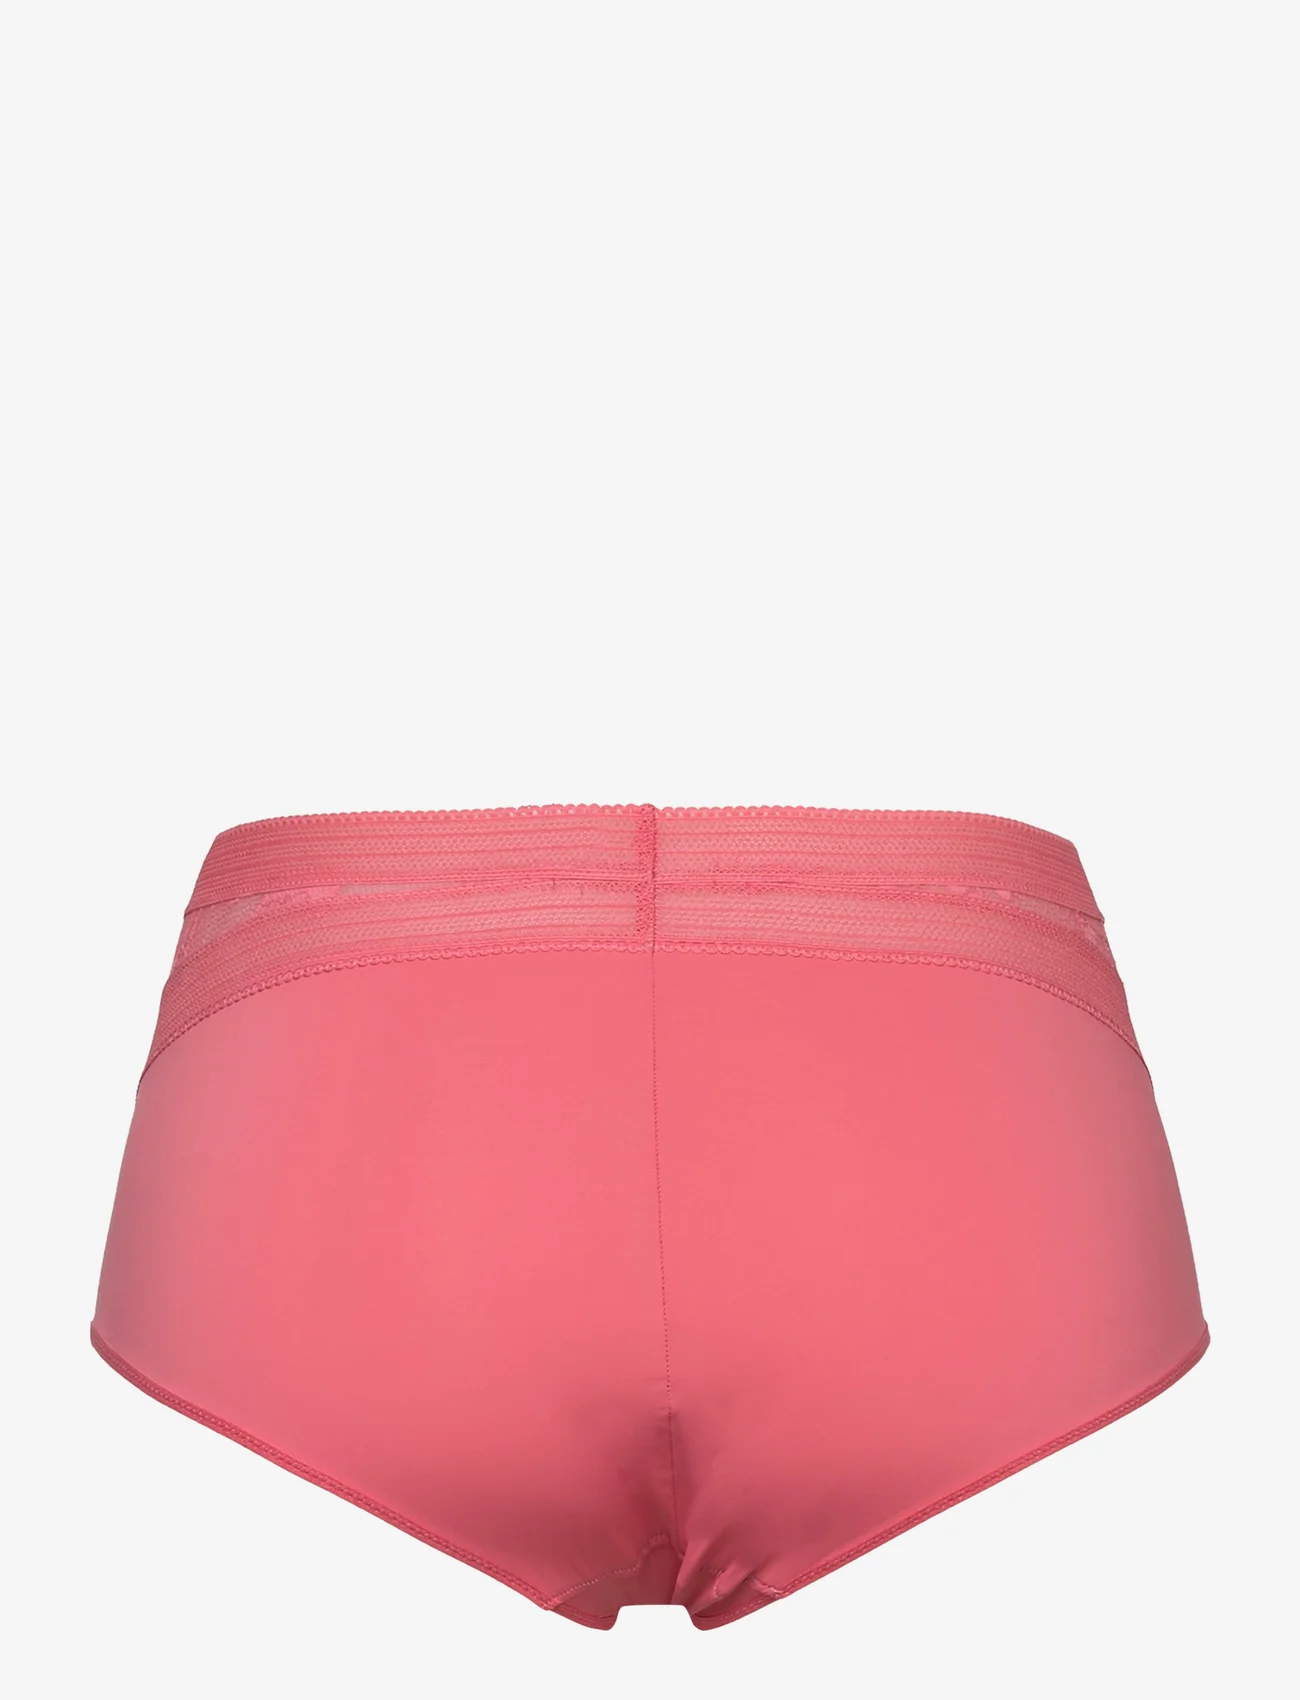 Chantelle Beach - True lace High-waisted full brief - dolna bielizna - pink rose - 1